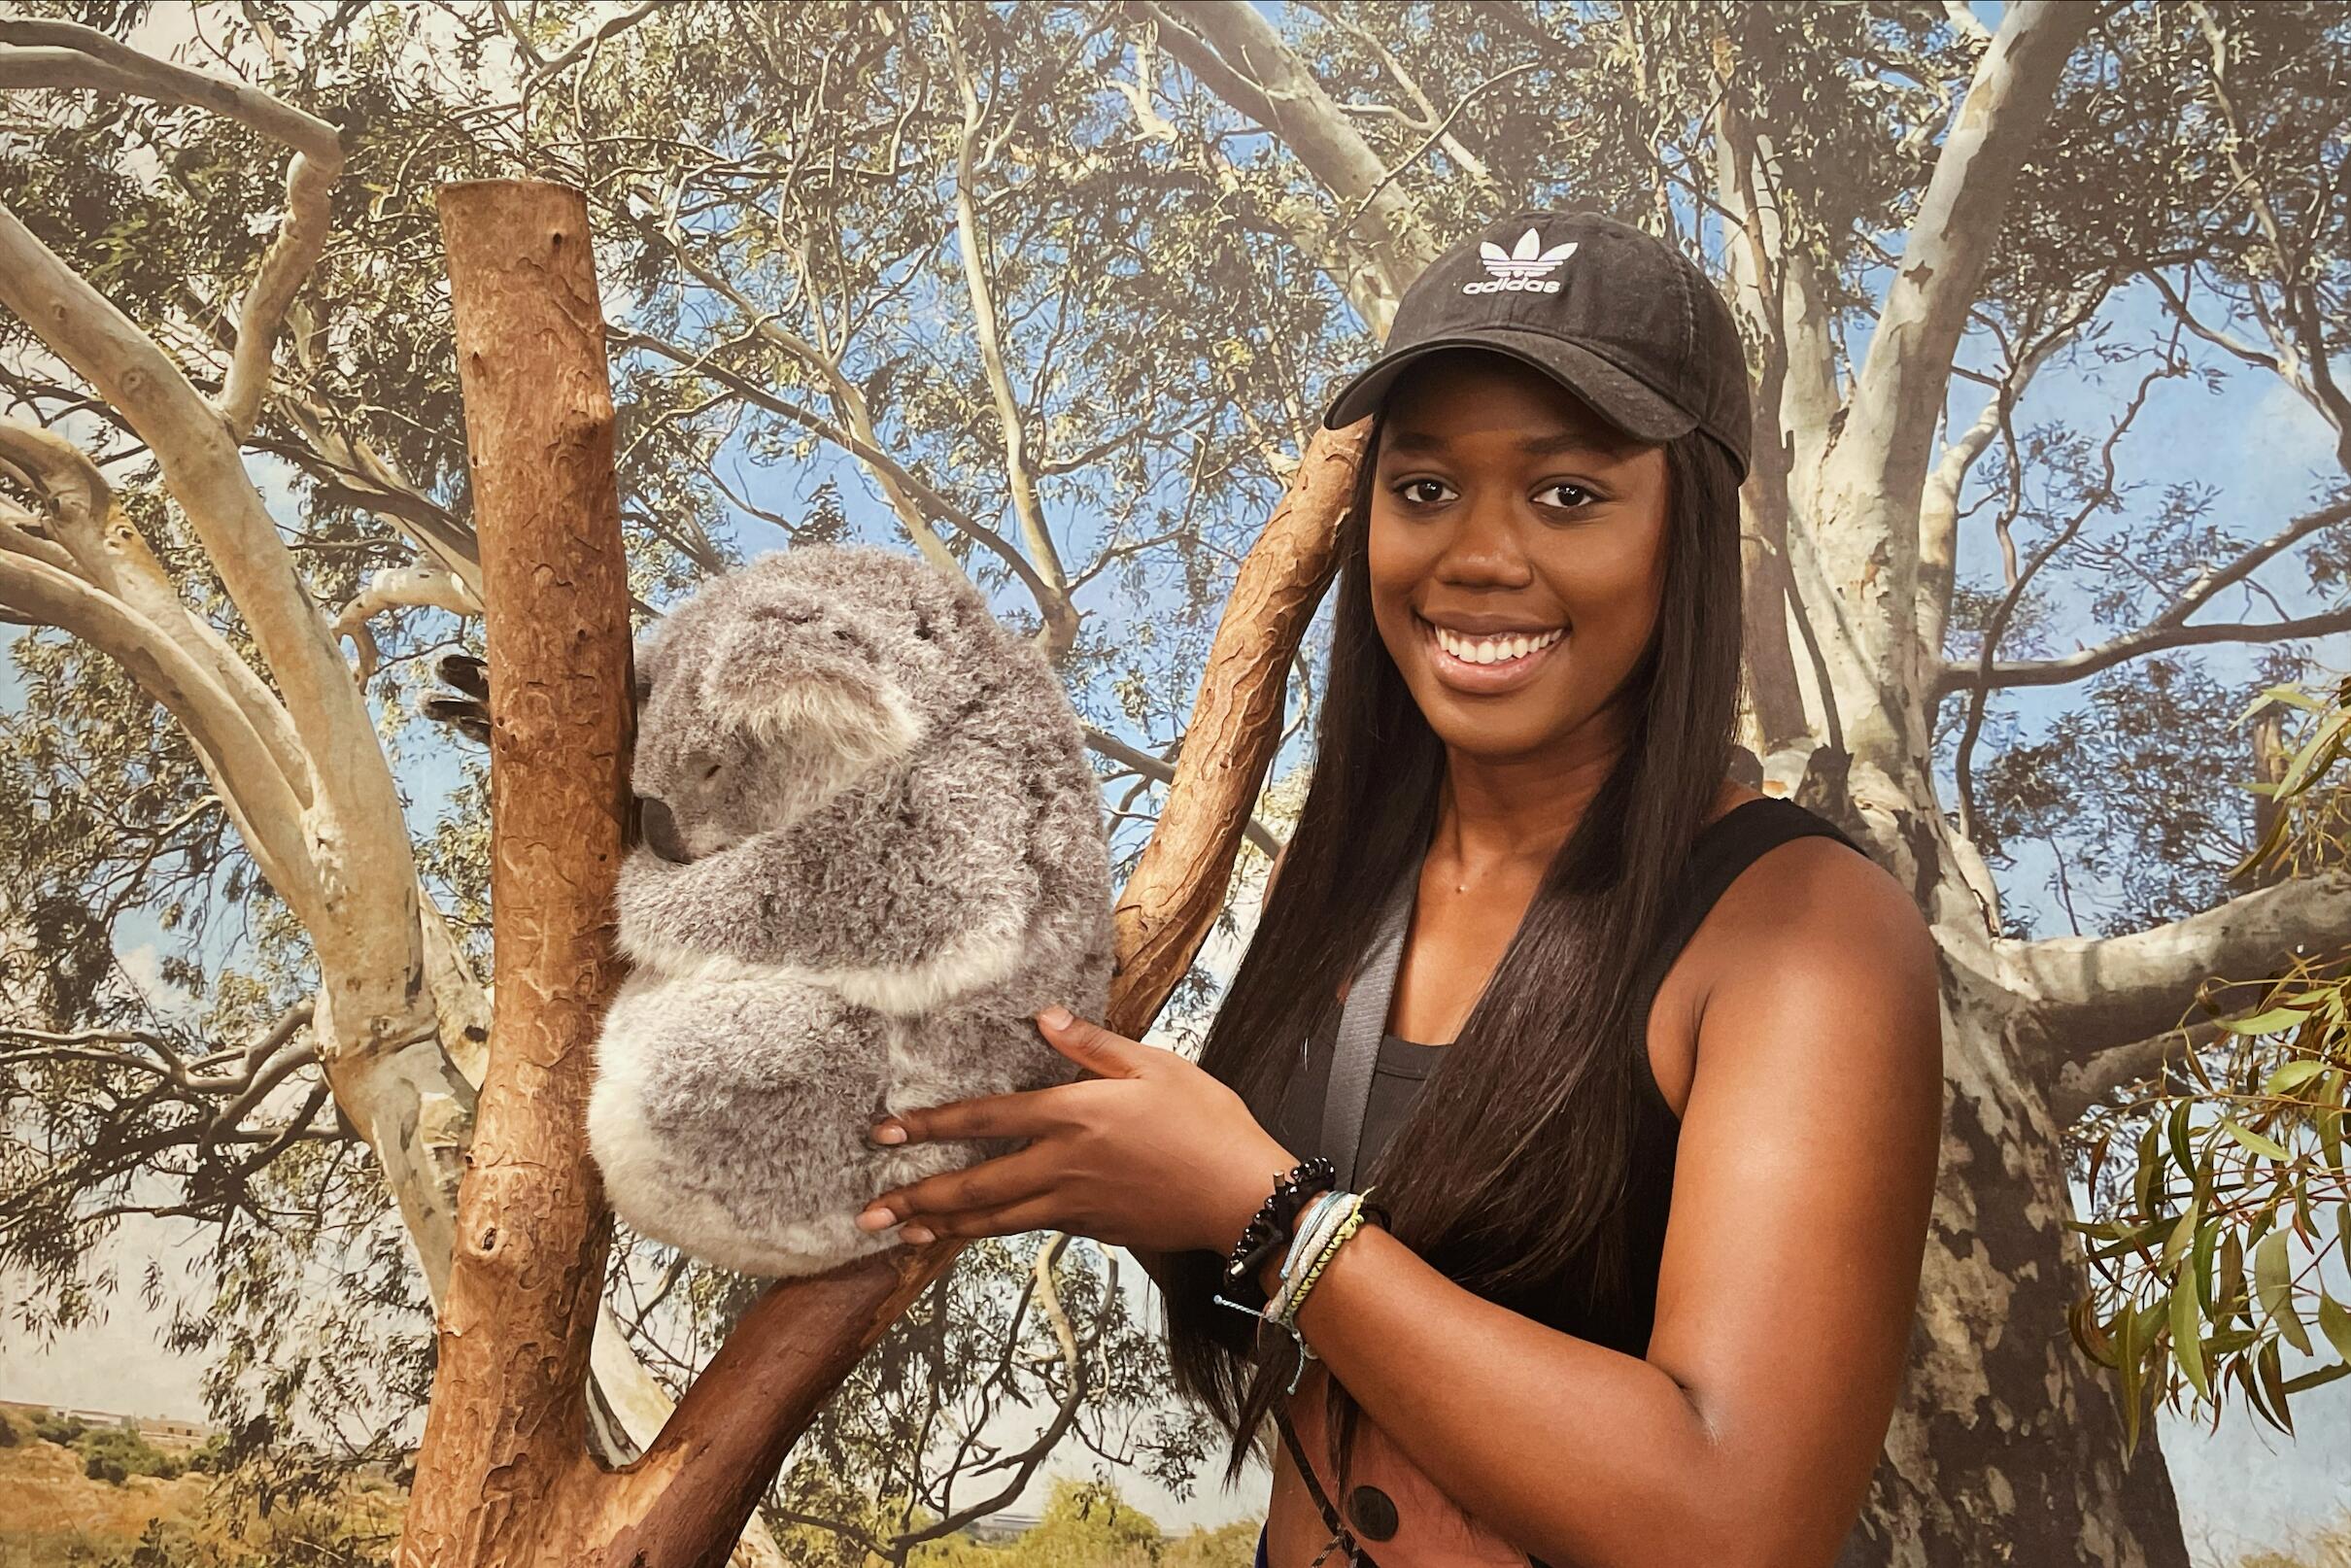 Kelly Anna Lucas studying abroad in Australia